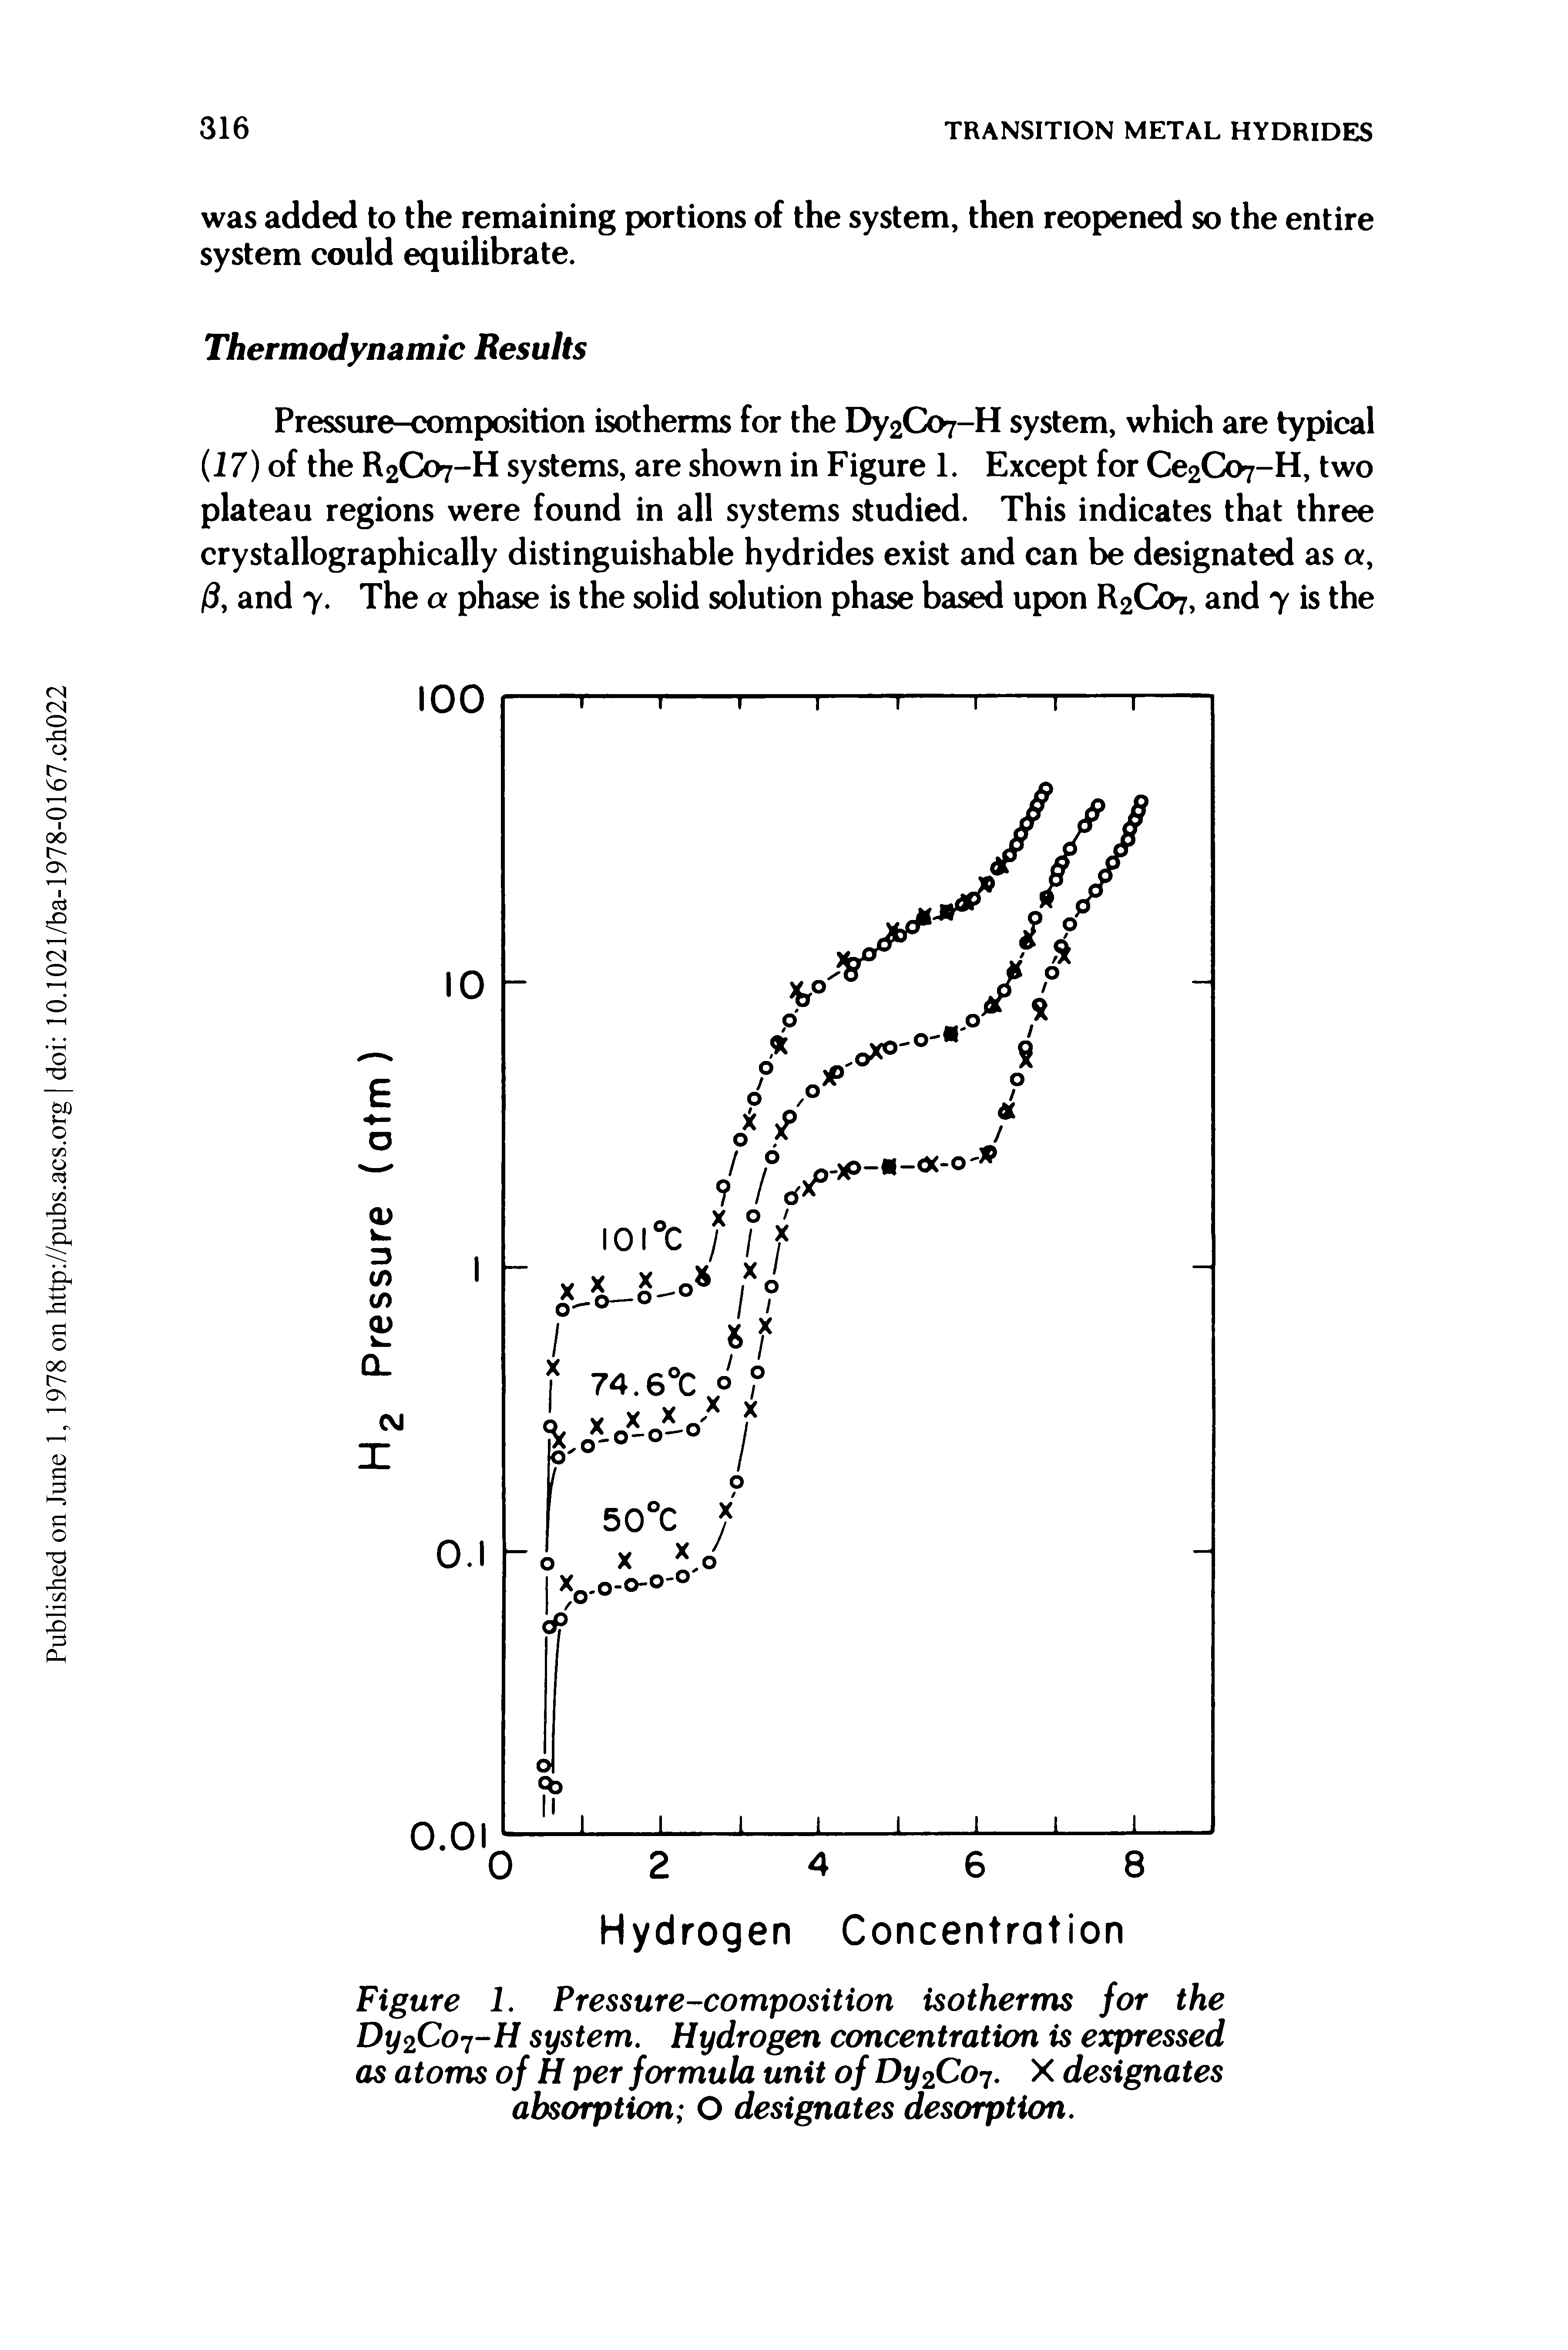 Figure 1. Pressure-composition isotherms for the Dy2Co7-H system. Hydrogen concentration is expressed as atoms of H per formula unit of Dy2Co7. X designates absorption O designates desorption.